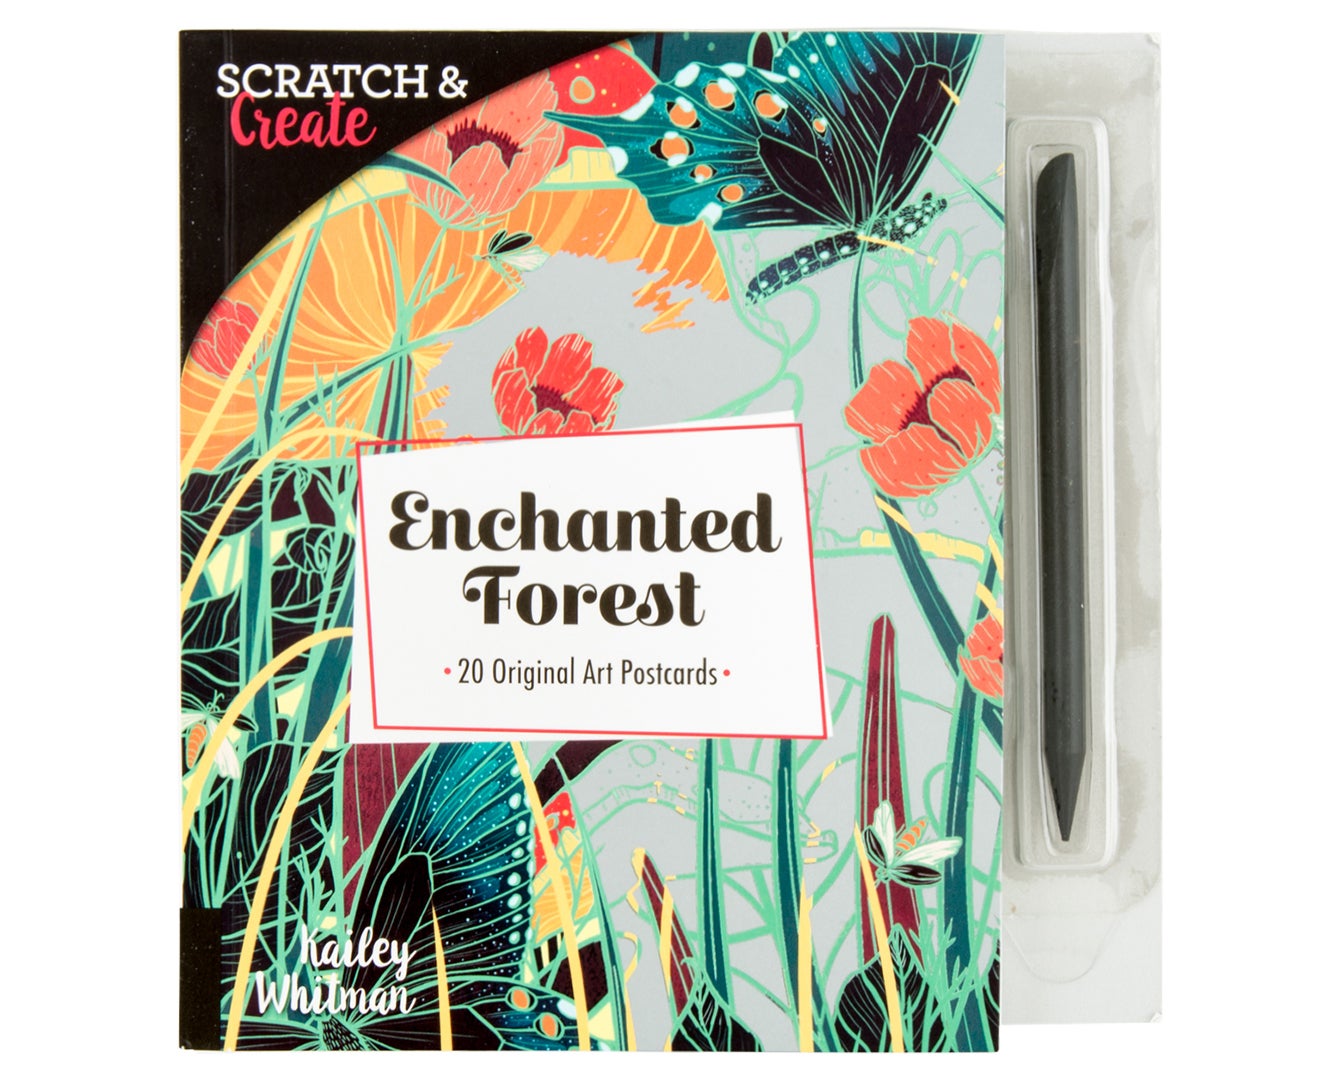 20 Postcard Book Kailey Whitman Scratch & Create Enchanted Forest Art/Craft